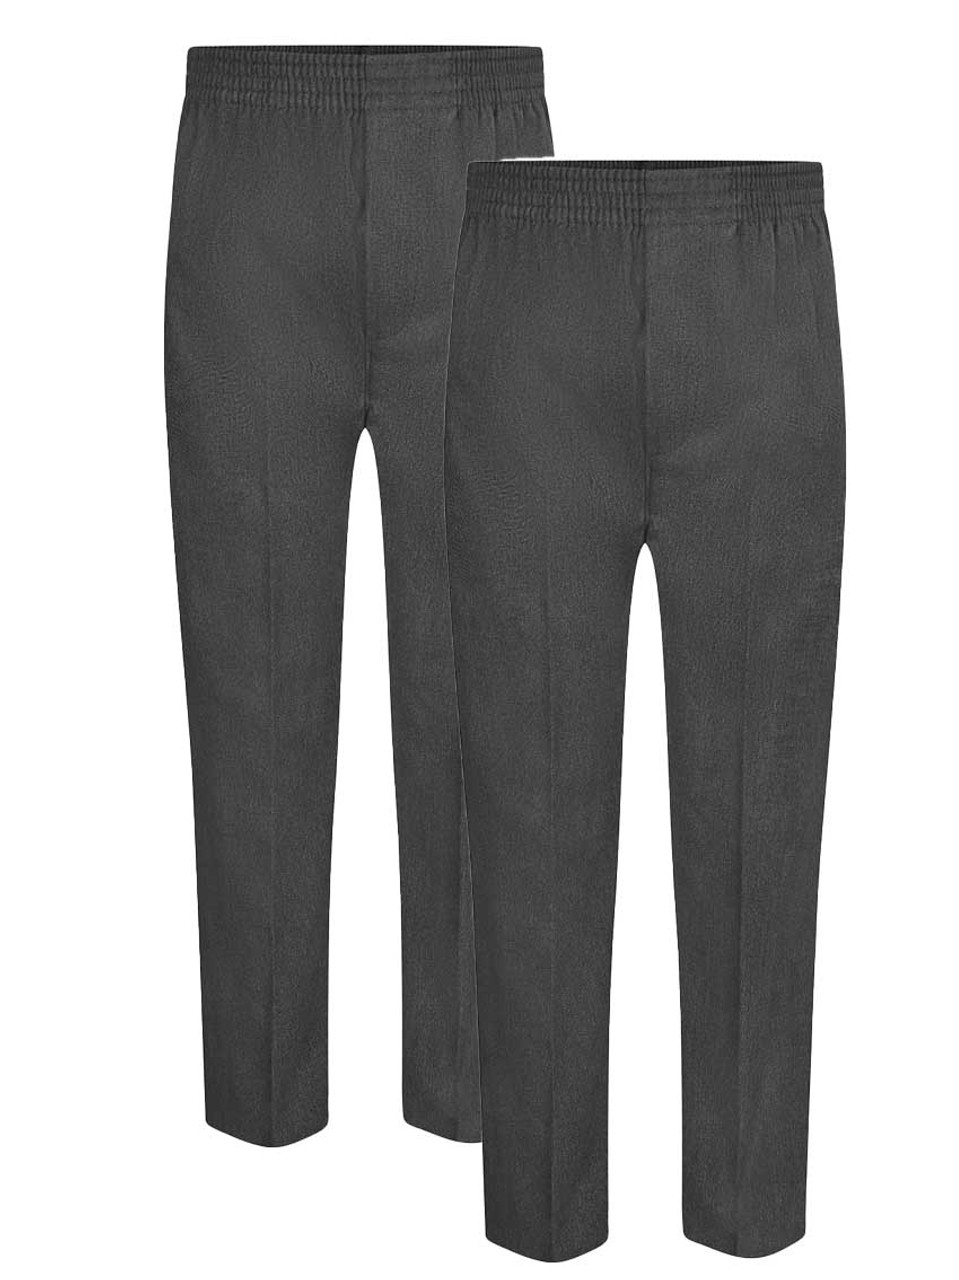 Buy INVICTUS Men Grey Tailored Fit Adjustable Waistband Formal Trousers   Trousers for Men 445389  Myntra